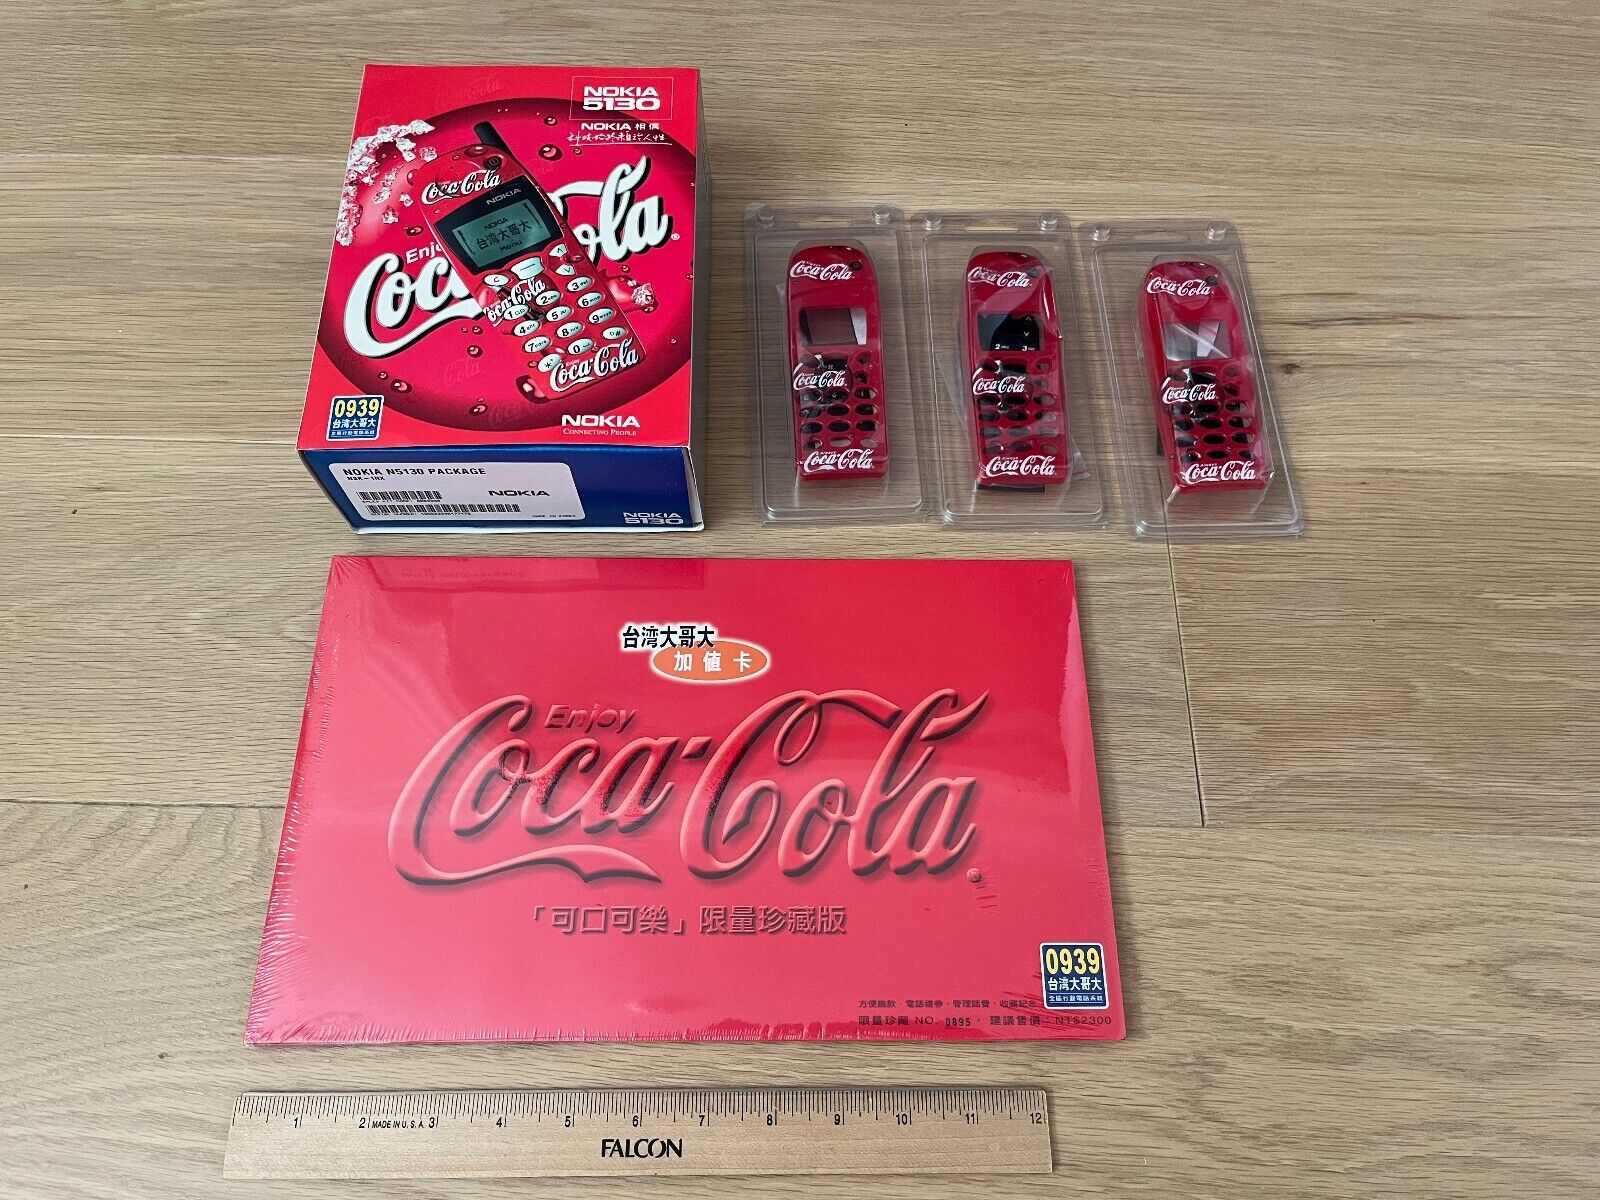 1999 Coca-Cola Nokia 5130 brand new never used in box face plates phone cards